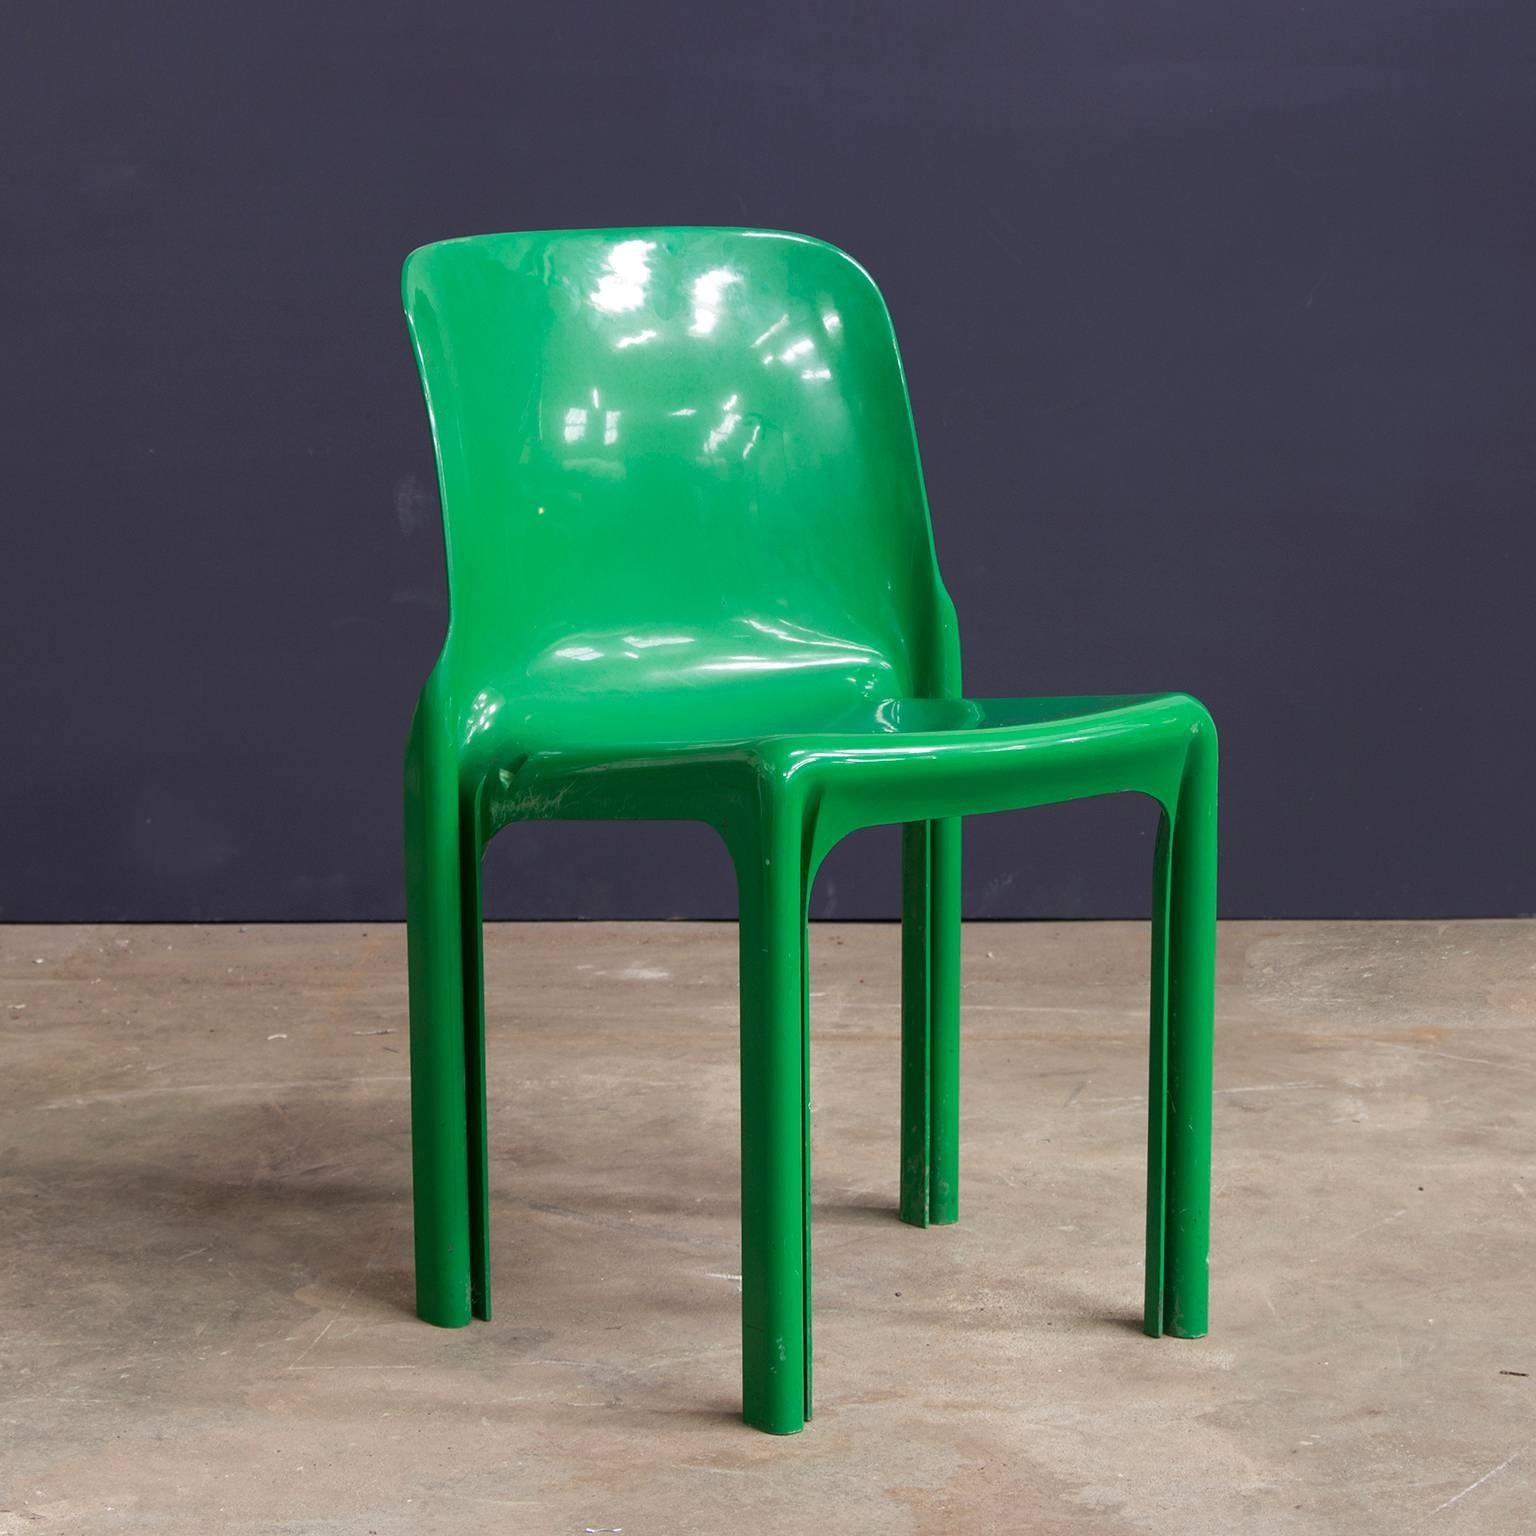 One piece or set of four or six green stacking chairs. Beautiful design. Some scratches on the side caused by stacking. Small damage at some chairs, like a little loss of color or slightly chipped.

Also available a matching white table by Vico